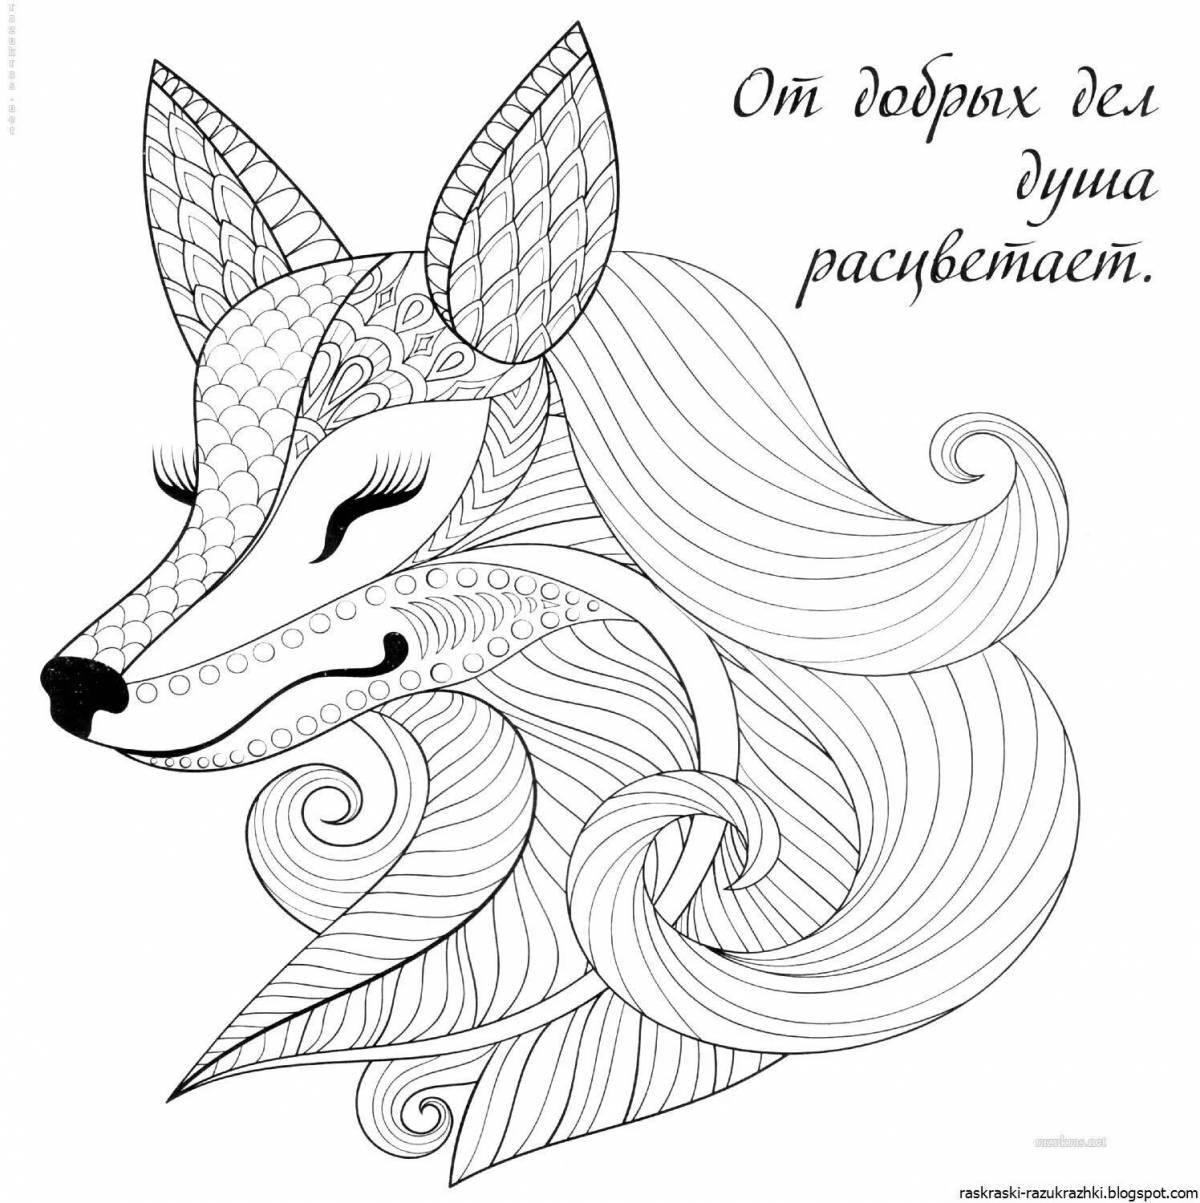 Adorable fox coloring book for girls